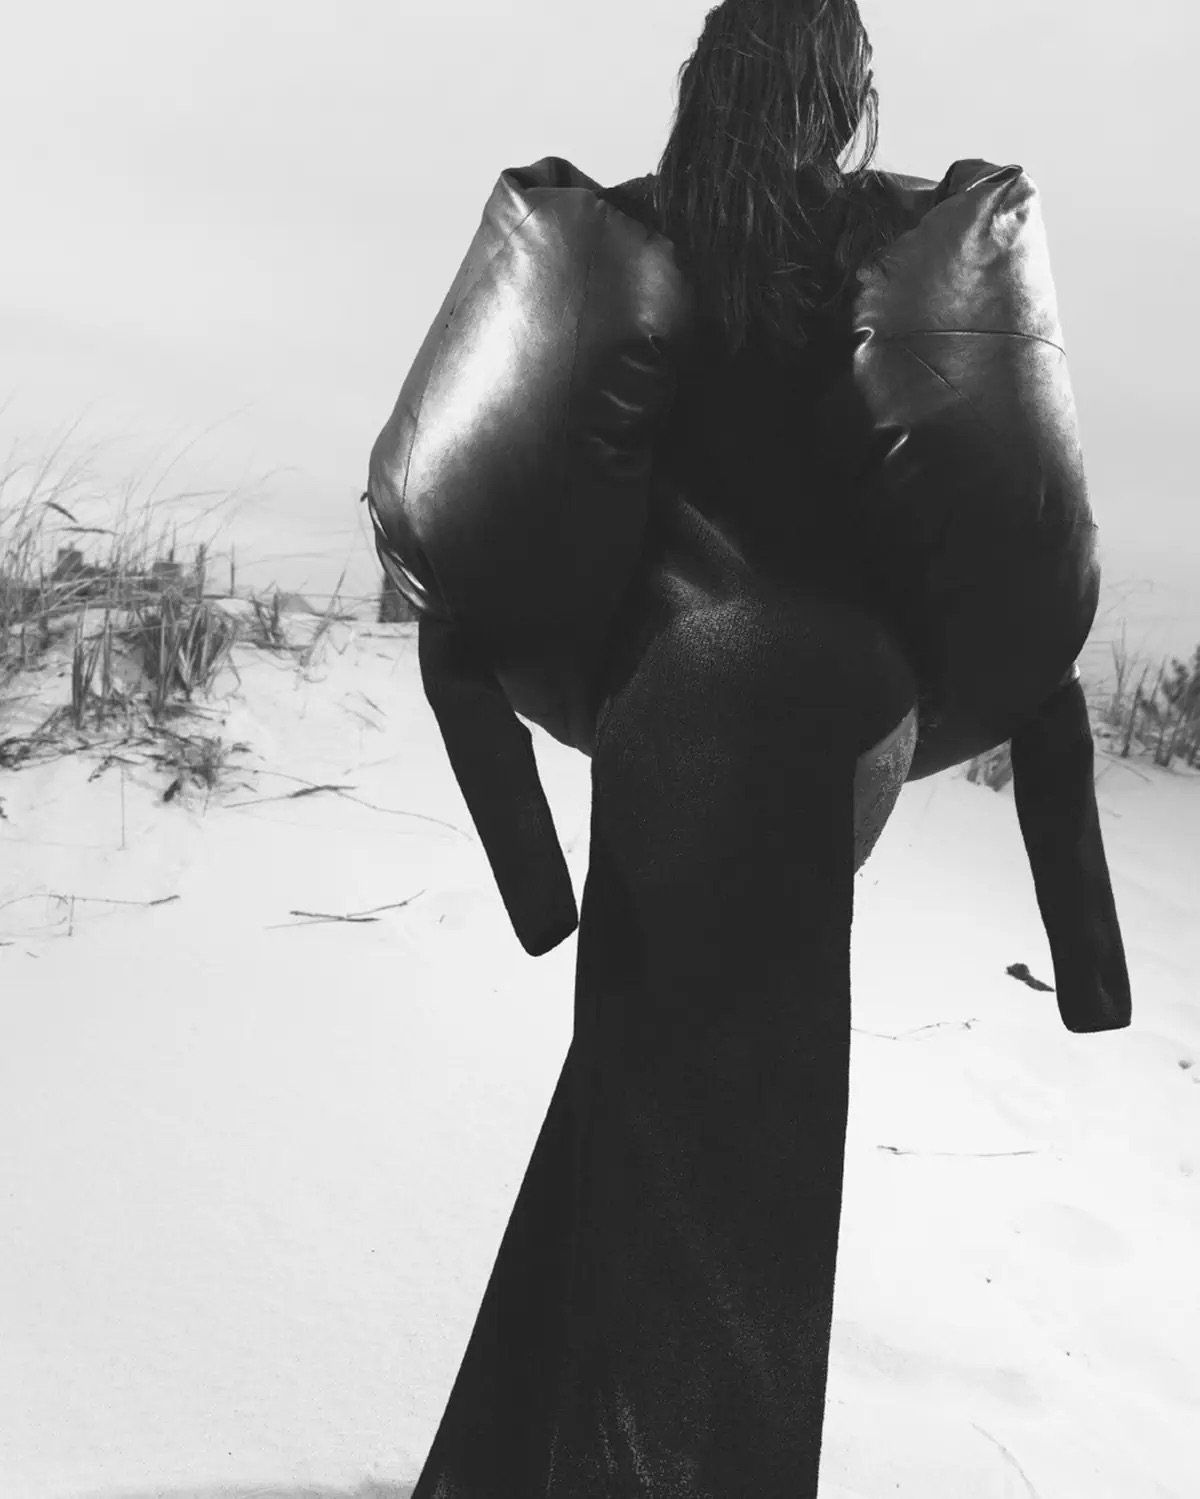 Emily Ratajkowski in Rick Owens Dress by Thue Norgaard for D Repubblica Magazine May 2023